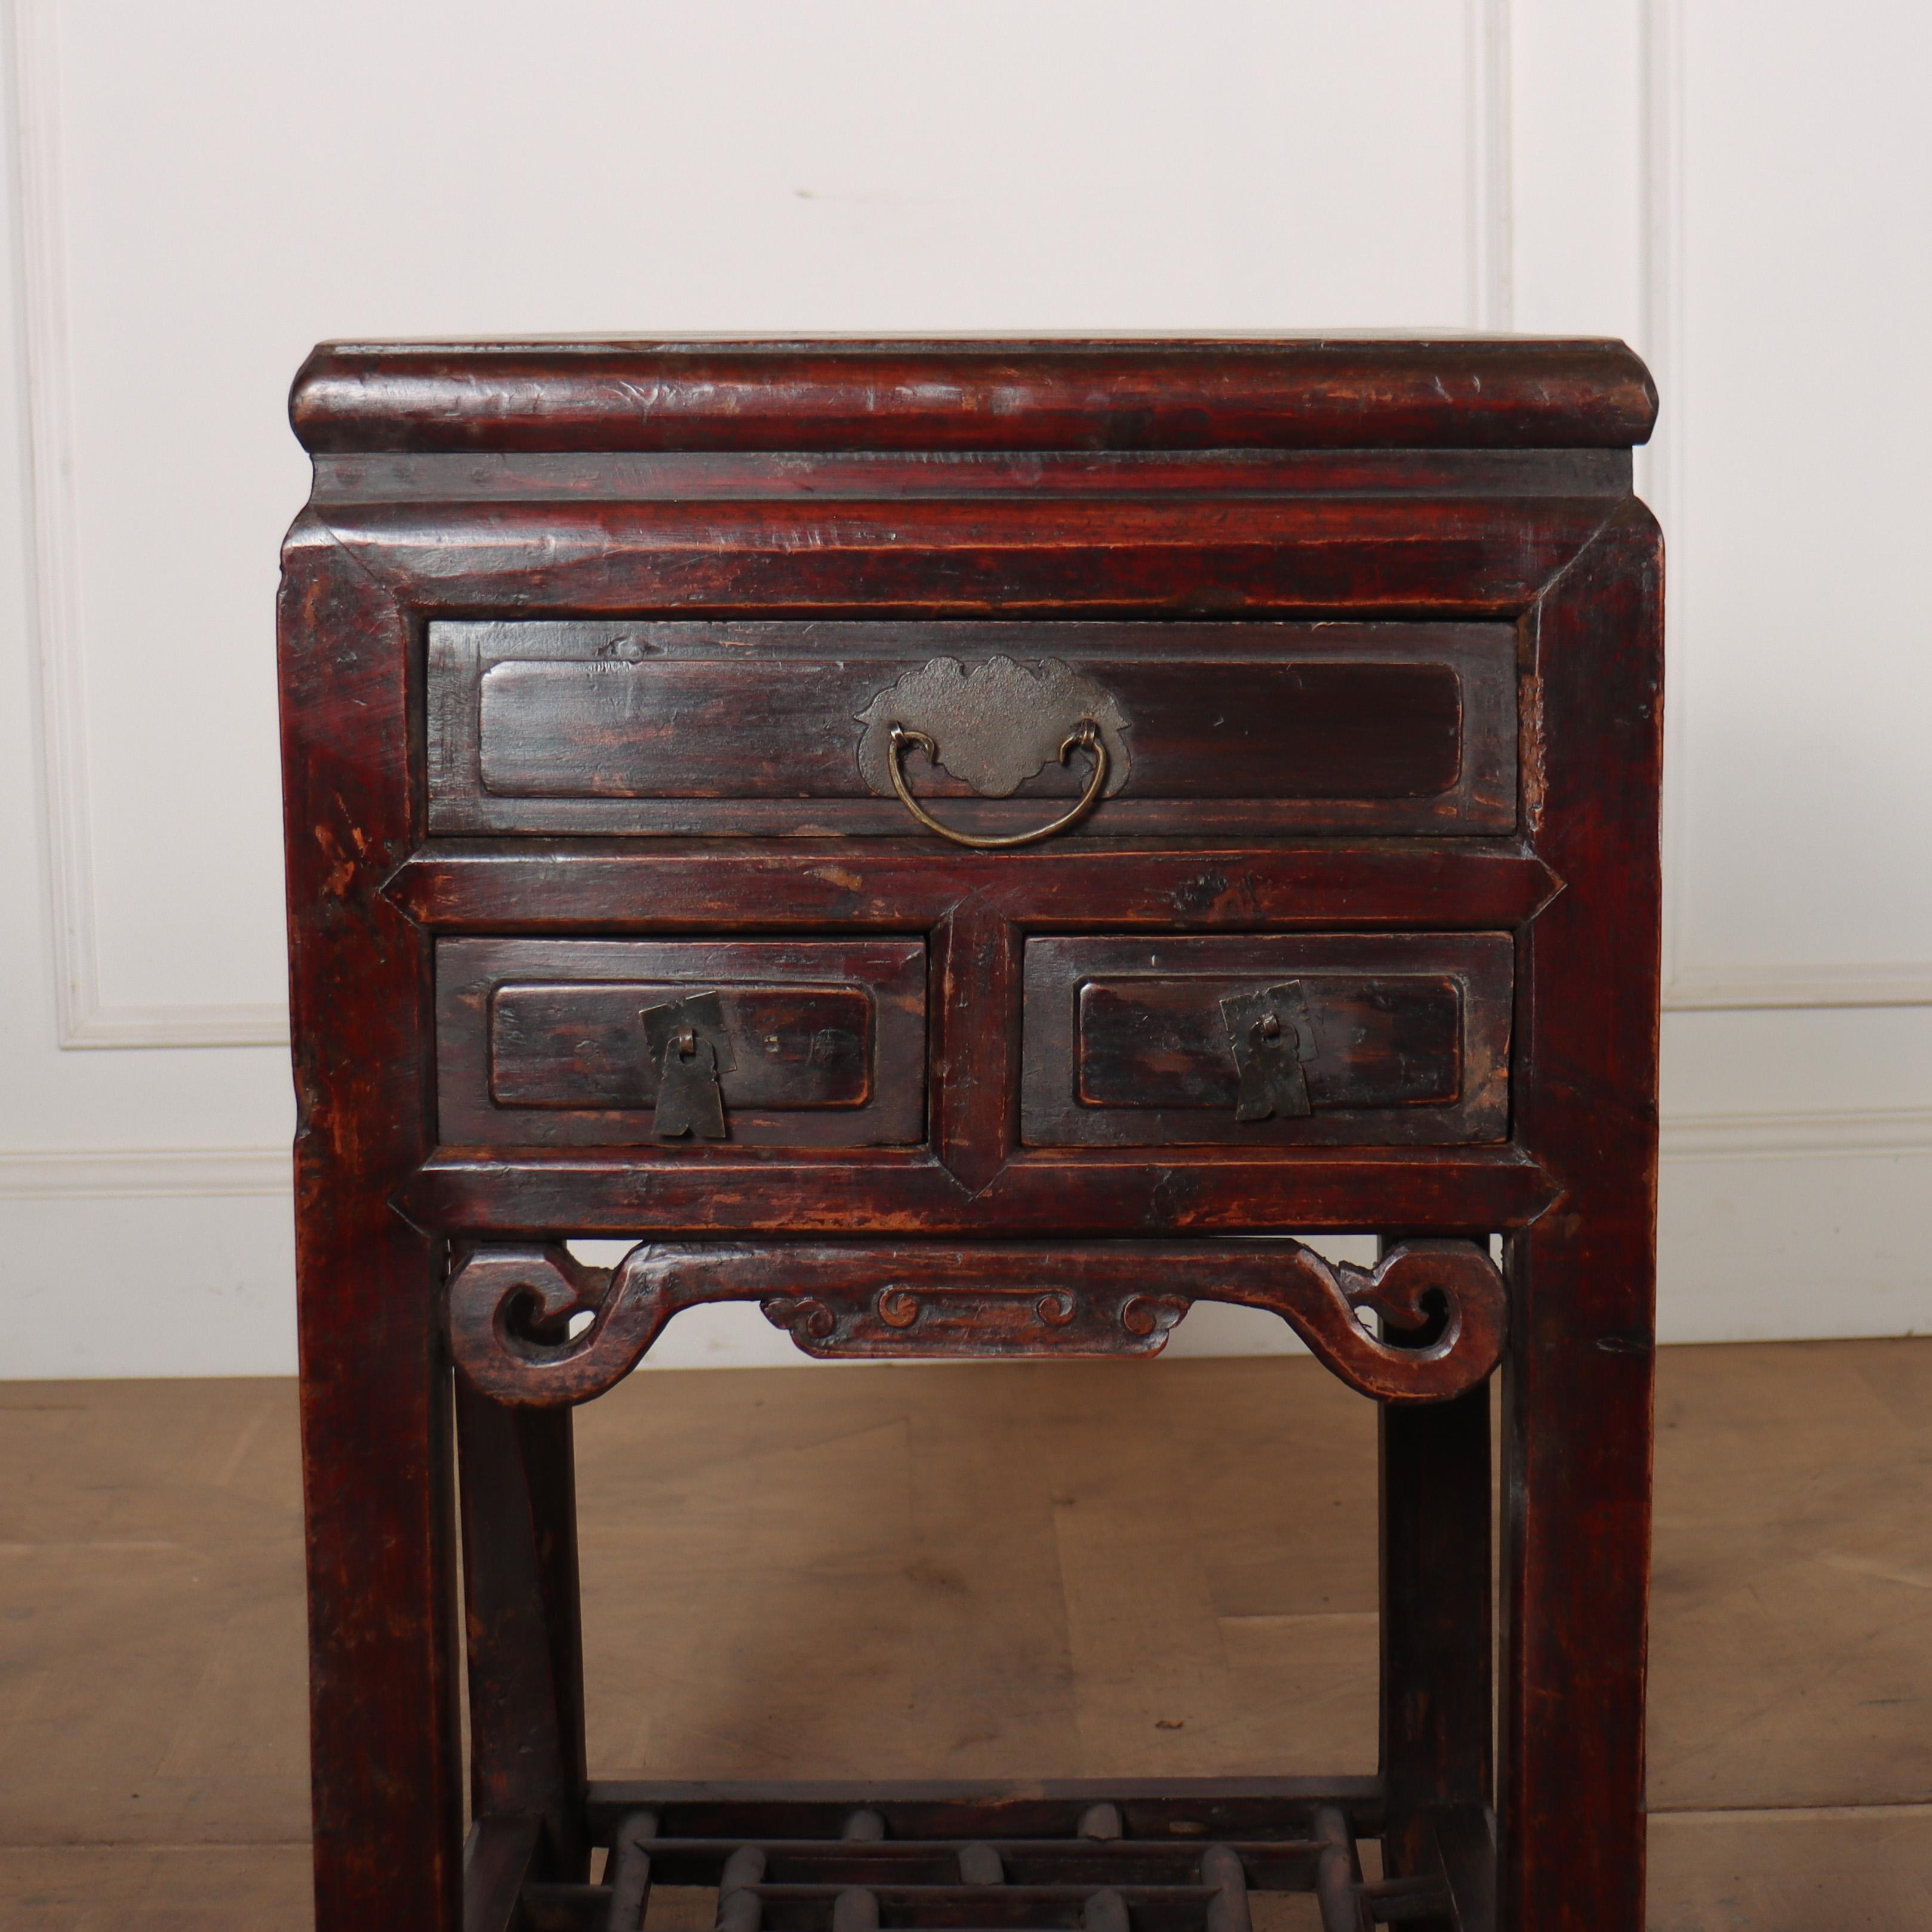 Near pair of 19th C Chinese bedside tables. 1890.

Reference: 8296

Dimensions
17.5 inches (44 cms) Wide
17.5 inches (44 cms) Deep
31 inches (79 cms) High